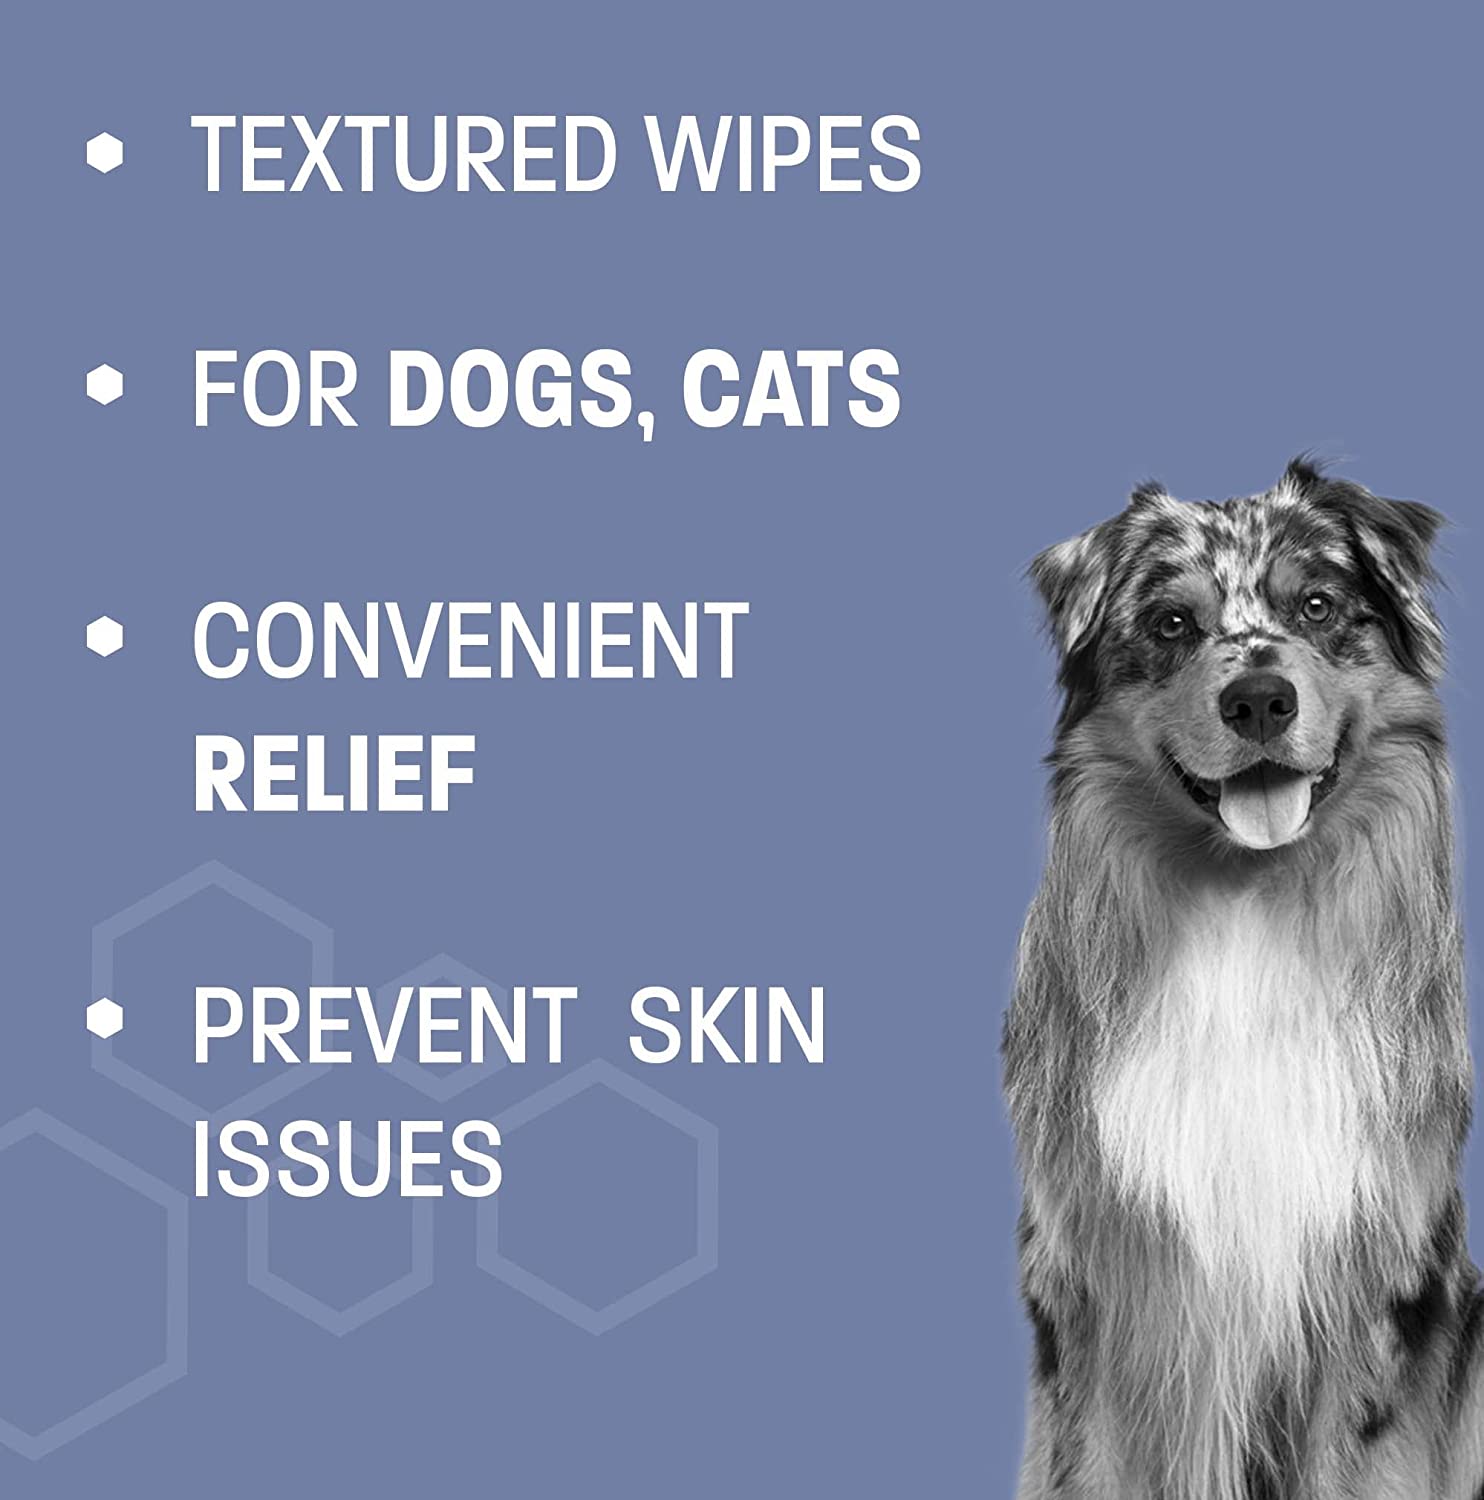 Chlorhexidine Antiseptic Wipes for Dogs